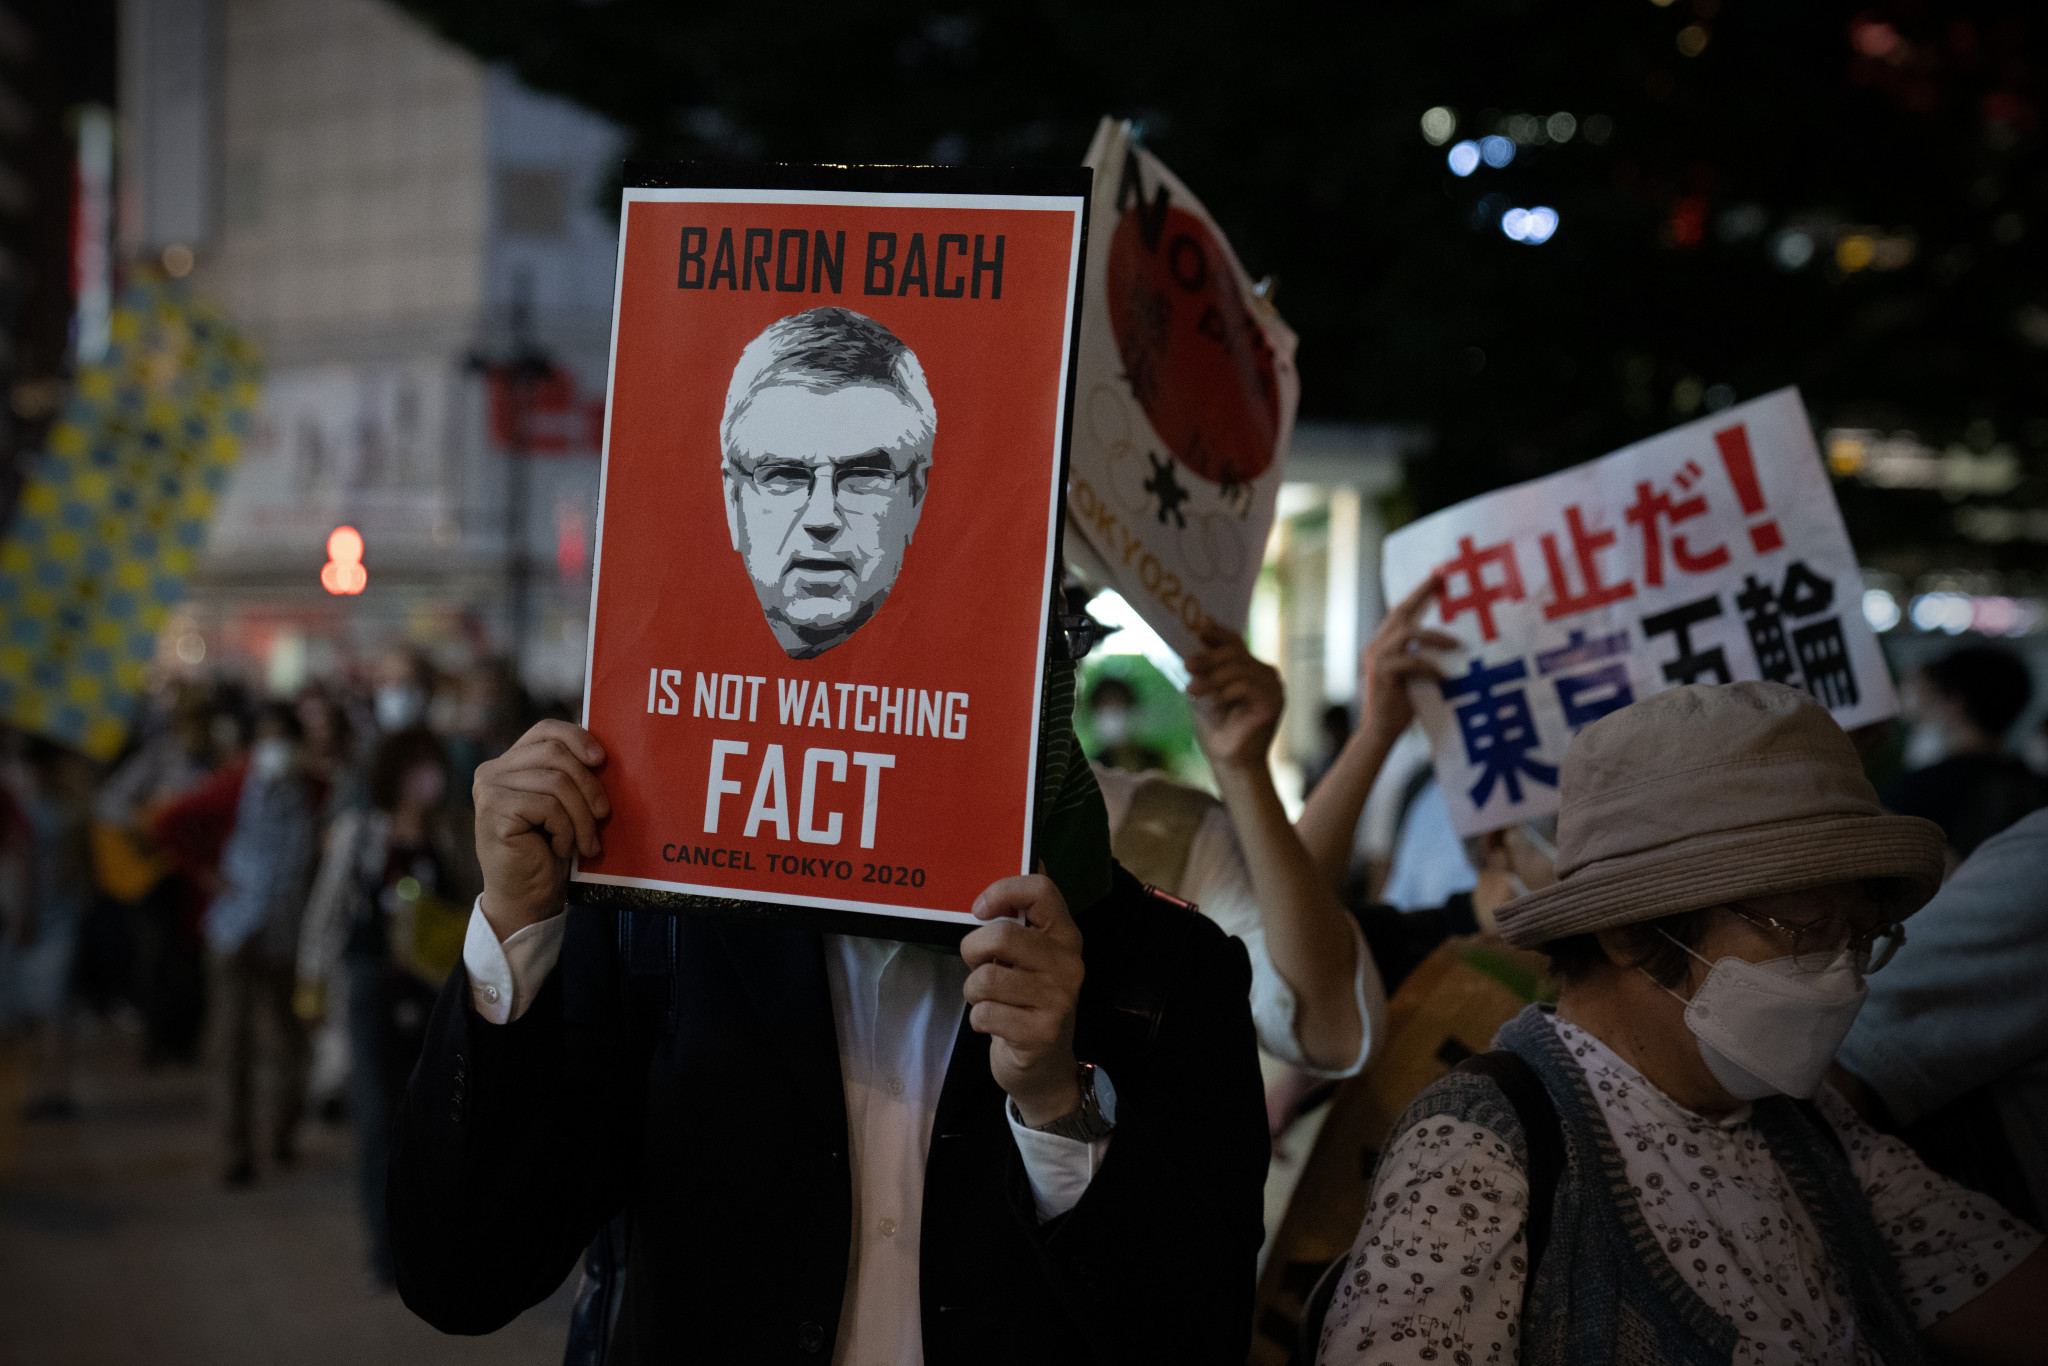 IOC President Thomas Bach has faced protests since his arrival in Tokyo last week from angry Japanese citizens who want the Olympics cancelled ©Getty Images